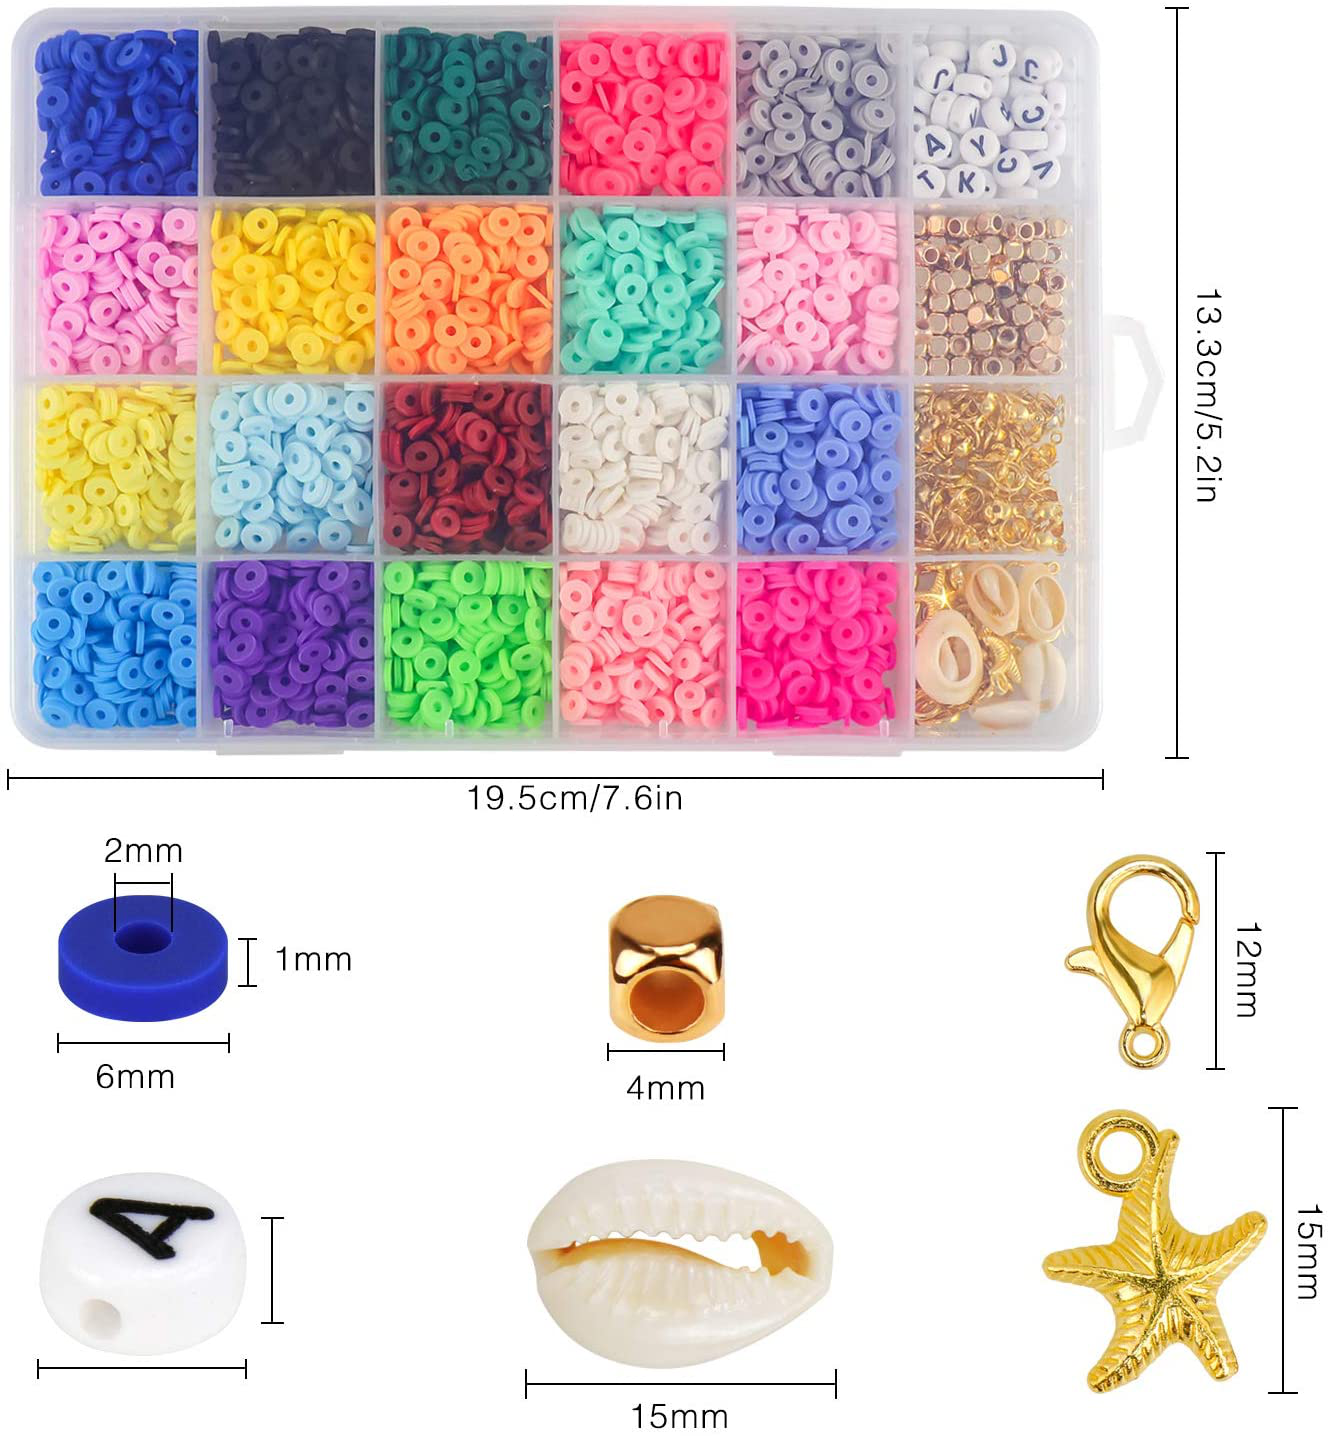 Zoyomax 4000 Pcs Clay Beads 6mm 20 Colors Flat Round Polymer Clay Spacer Beads with Pendant Charms Kit and 4 Roll Elastic Strings